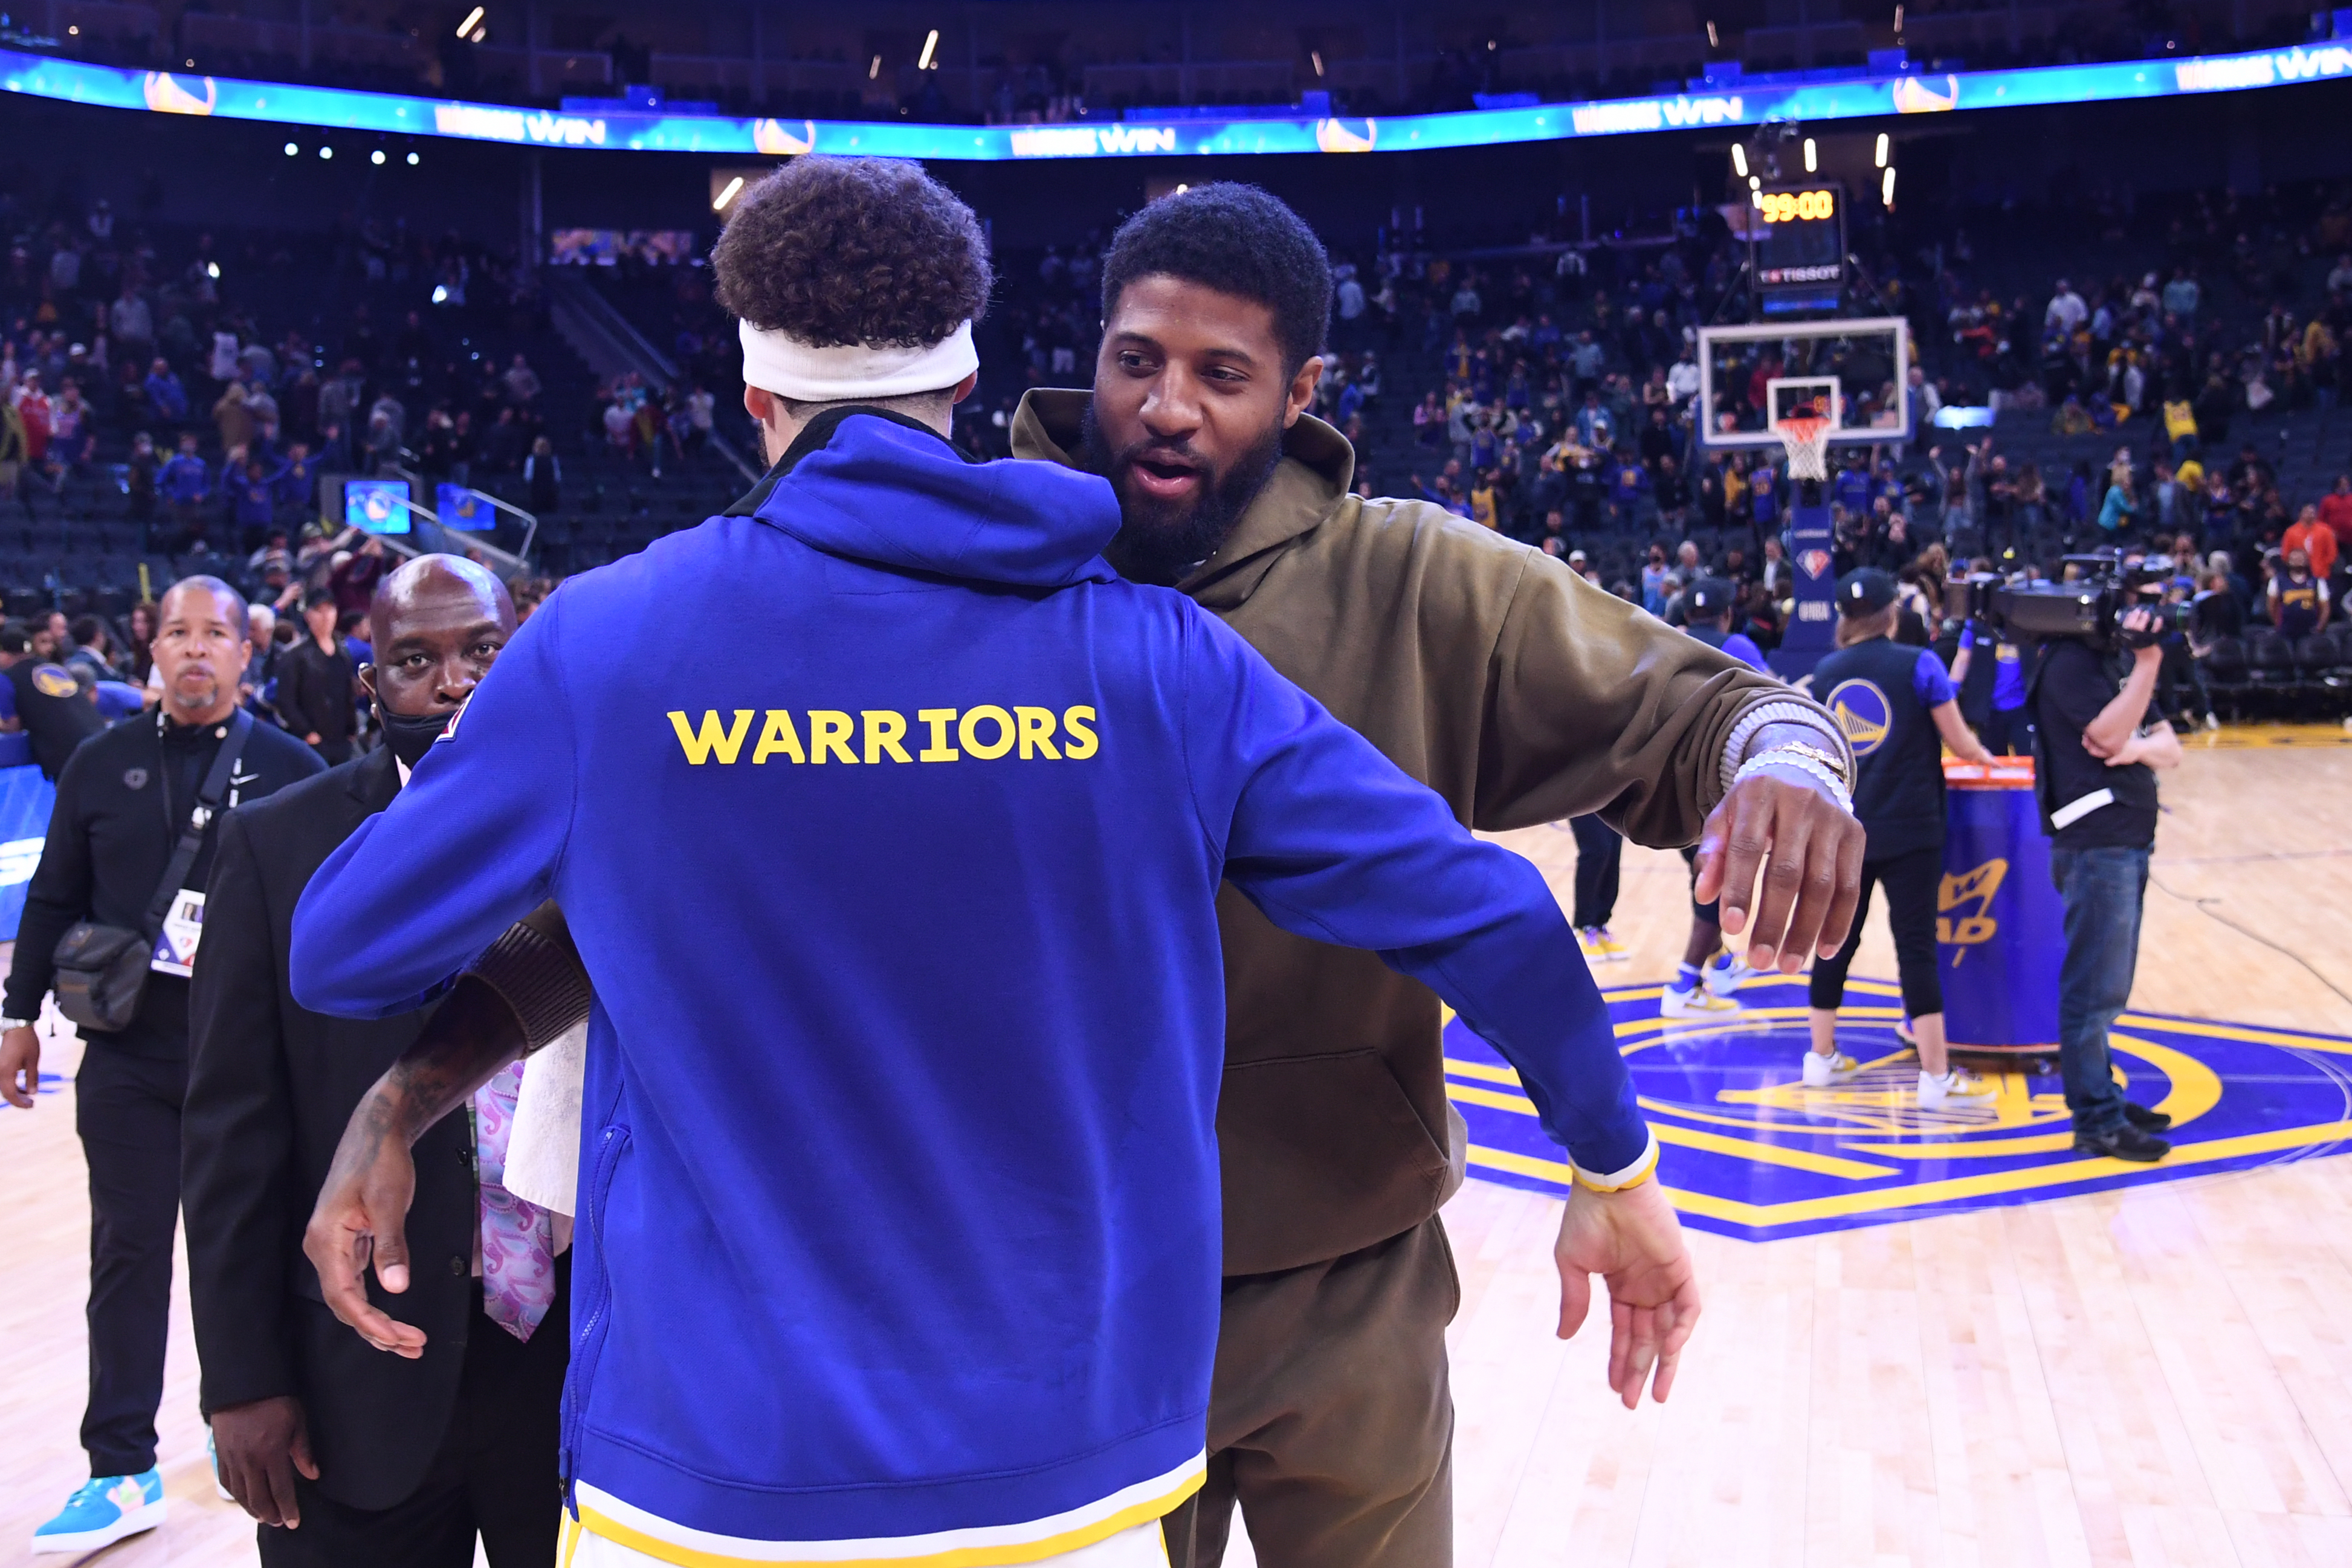 Paul George, in street clothes, hugging Klay Thompson